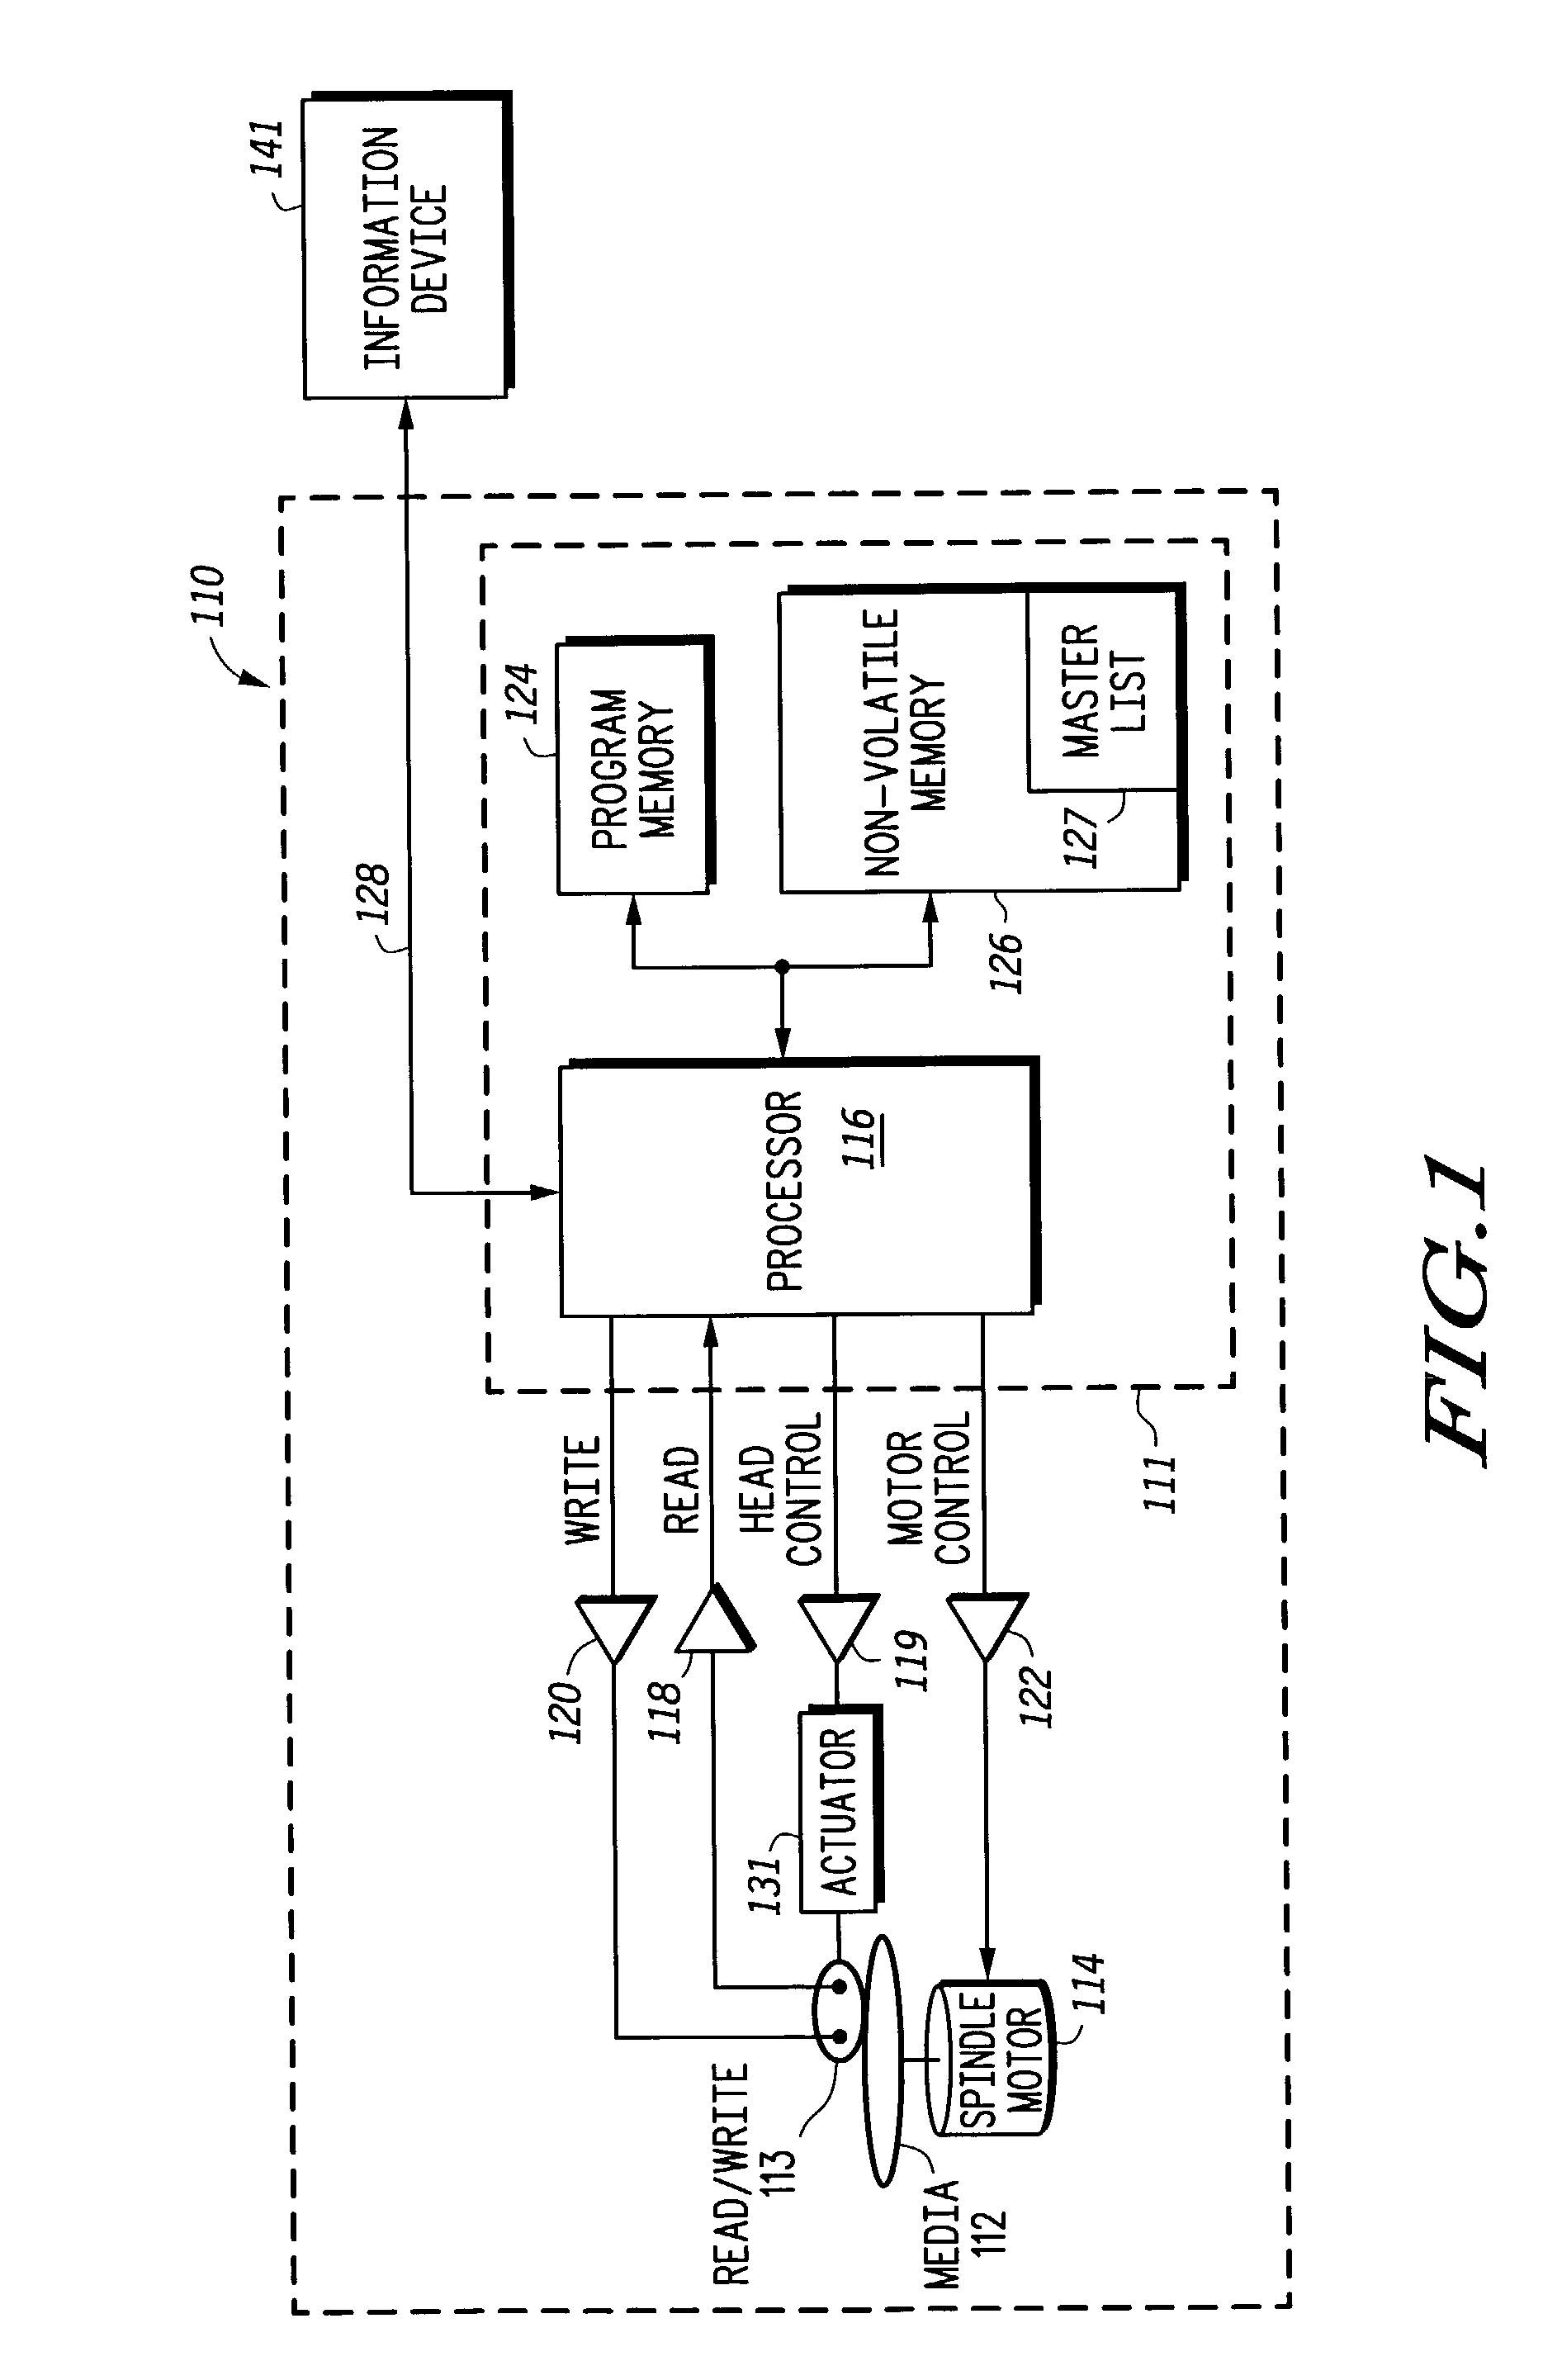 Removable media storage system with memory for storing operational data